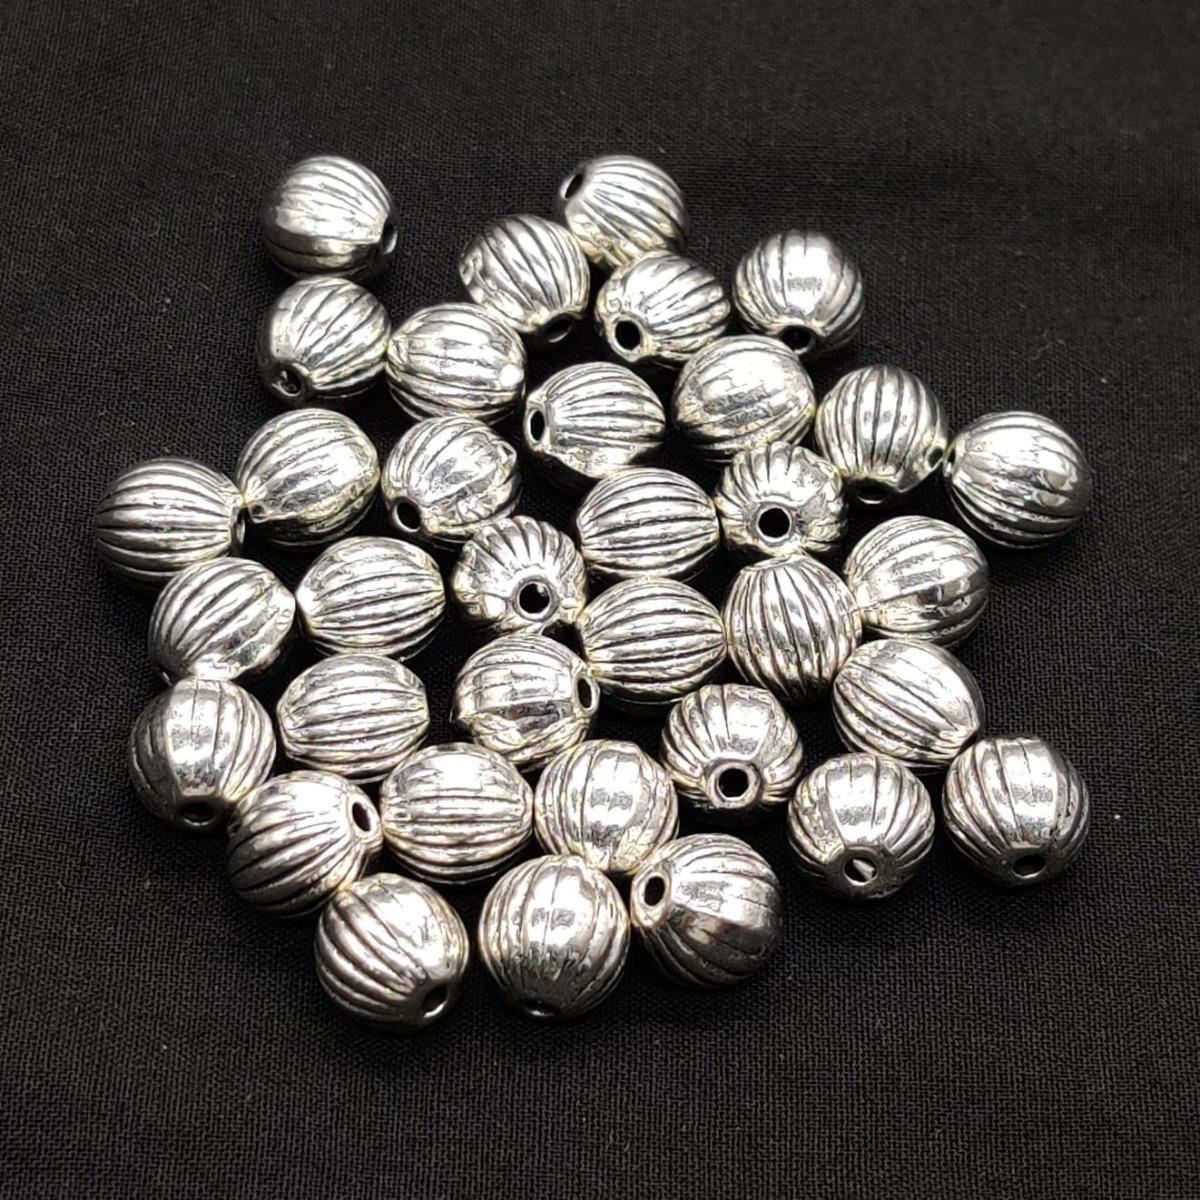 Cross Metal Beads Antique Silver, Pack of 10/20 Beads, 8mm Cross Beads,  Jewelry Making Supplies G1648 